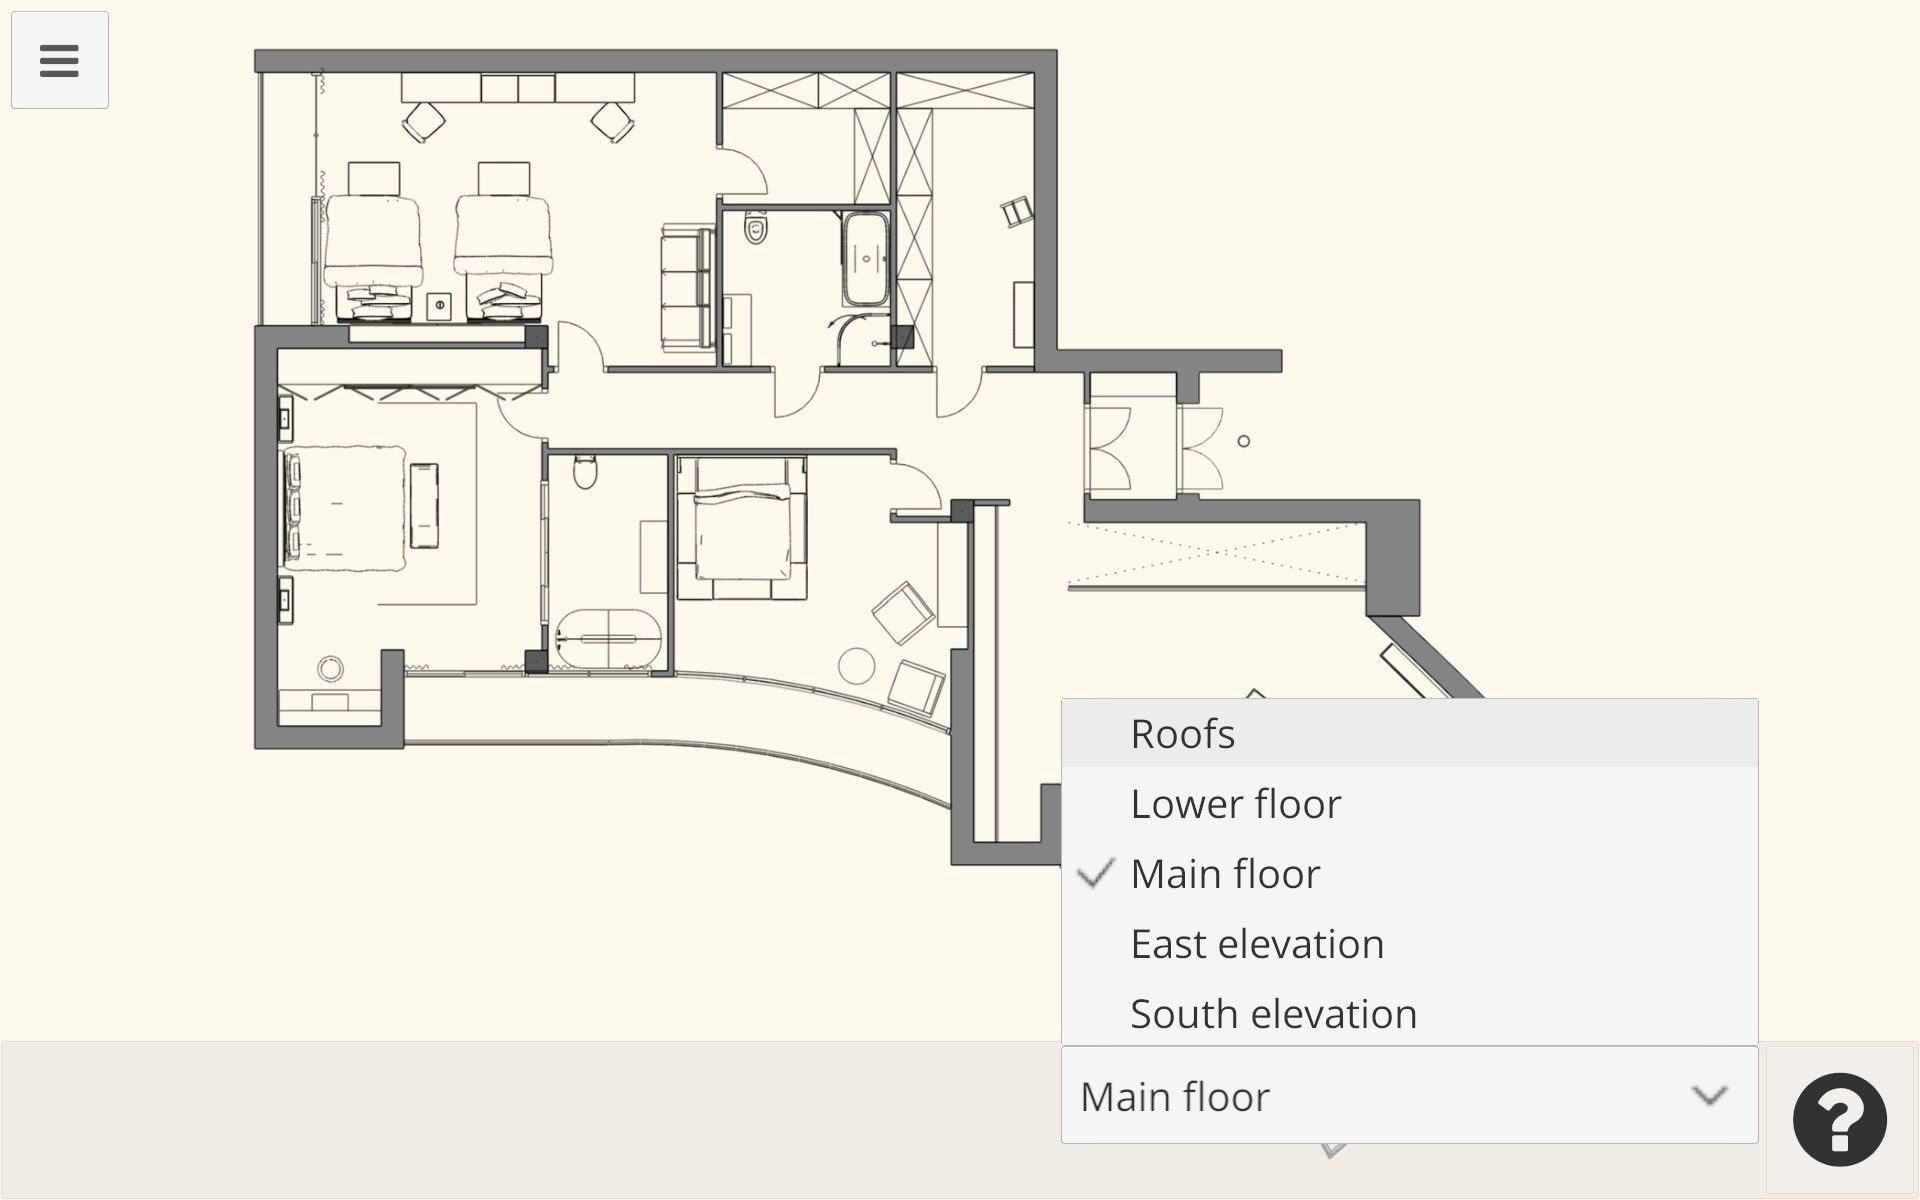 Bring your blueprints with you anywhere. You can choose between multiple floor plans, zoom and pan to explore them without needing a printed copy.